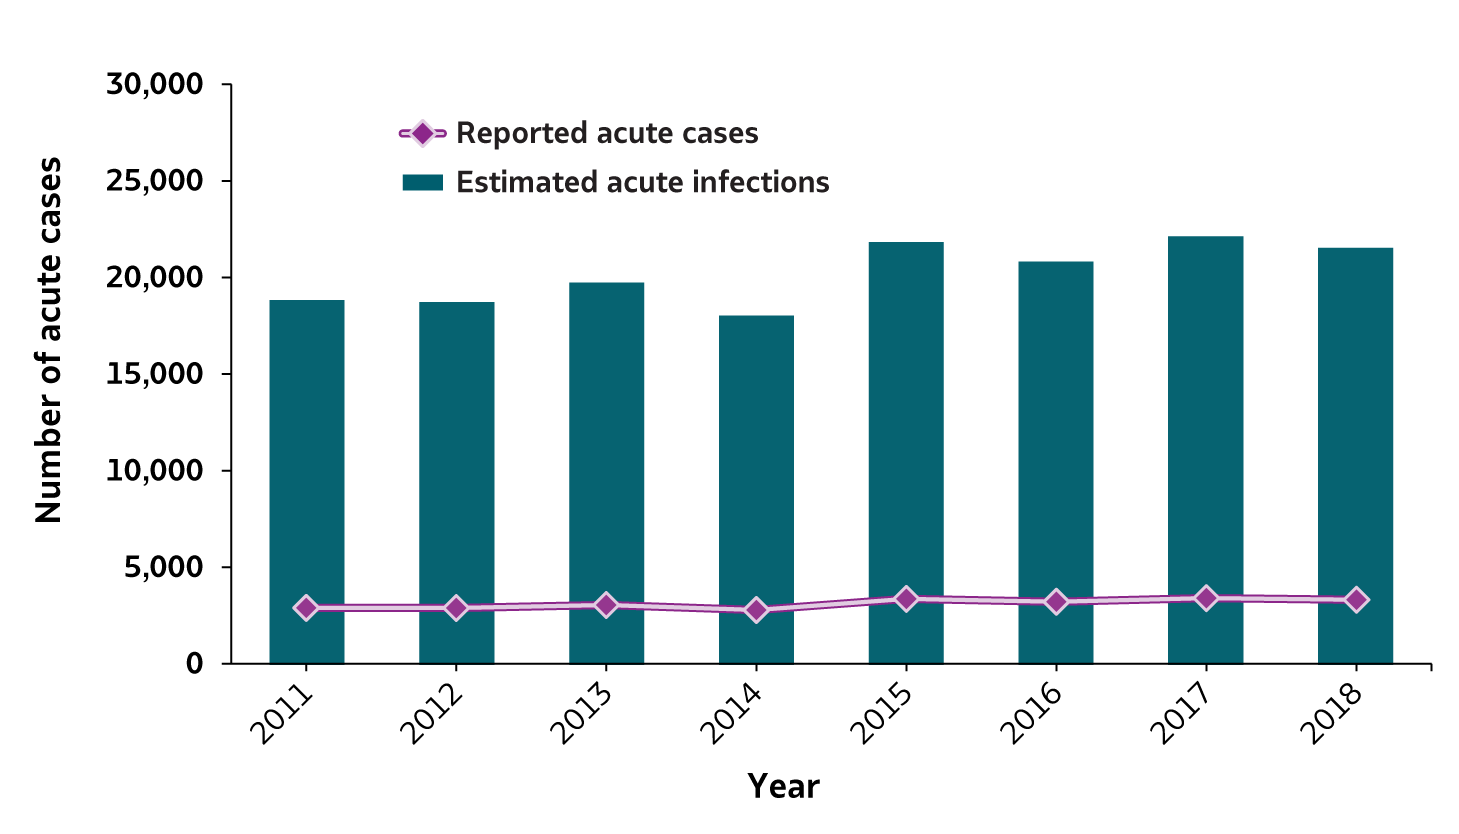 Figure 2.1.  The number of reported acute hepatitis B cases and estimated acute hepatitis B infection generally remained stable from 2011 through 2018.  In 2018 there were 3,322 reported cases of acute hepatitis B and 21,600 estimated acute hepatitis B infections.